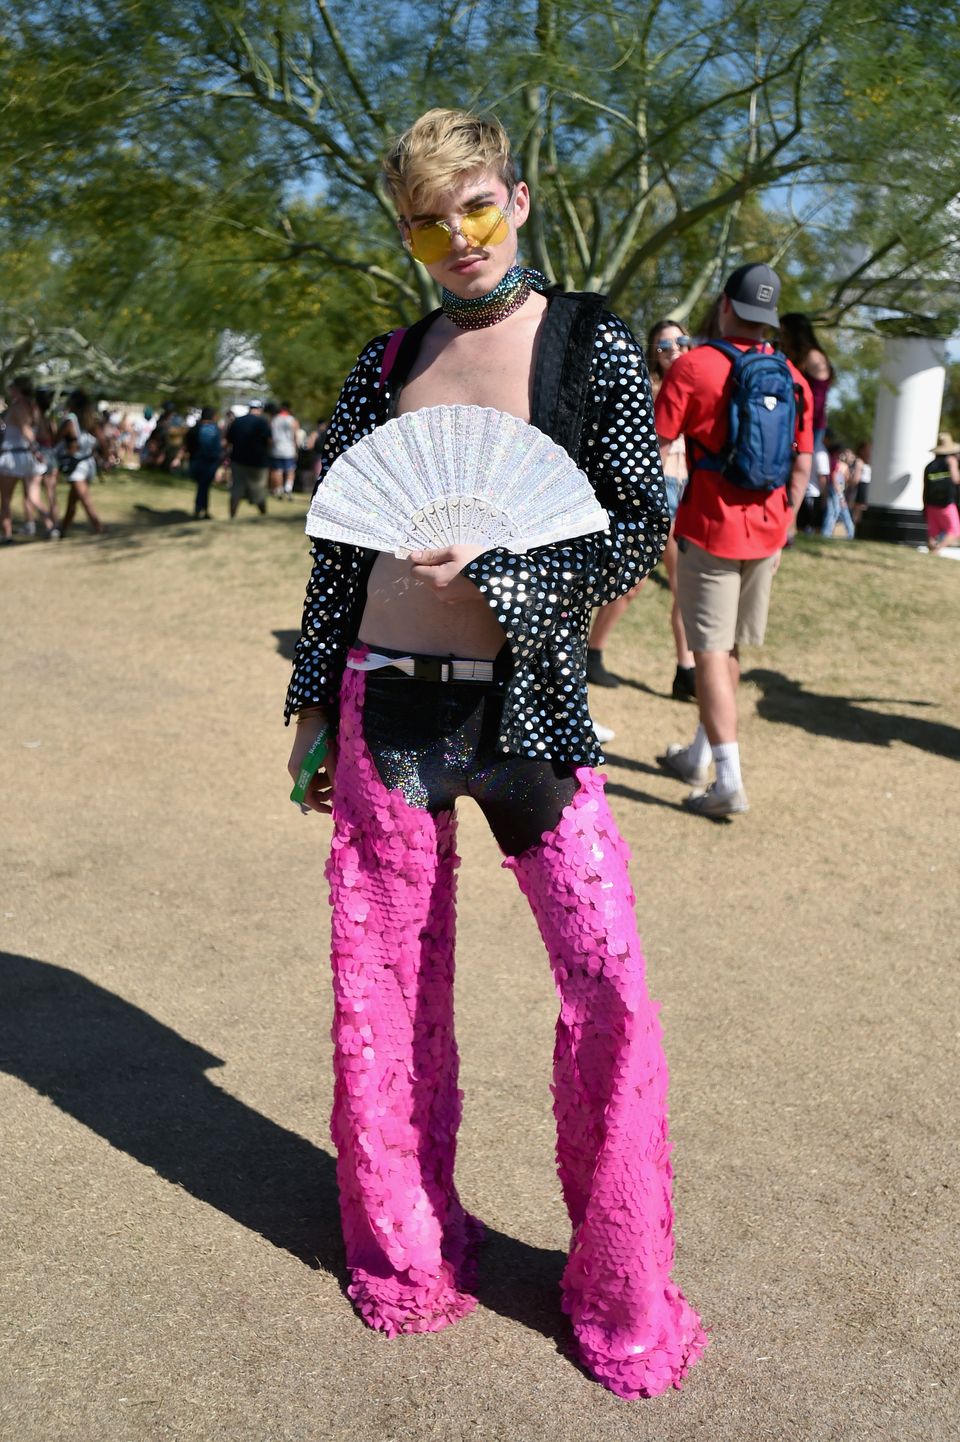 Coachella's Second Weekend Of Outfits Was More NSFW Than Ever